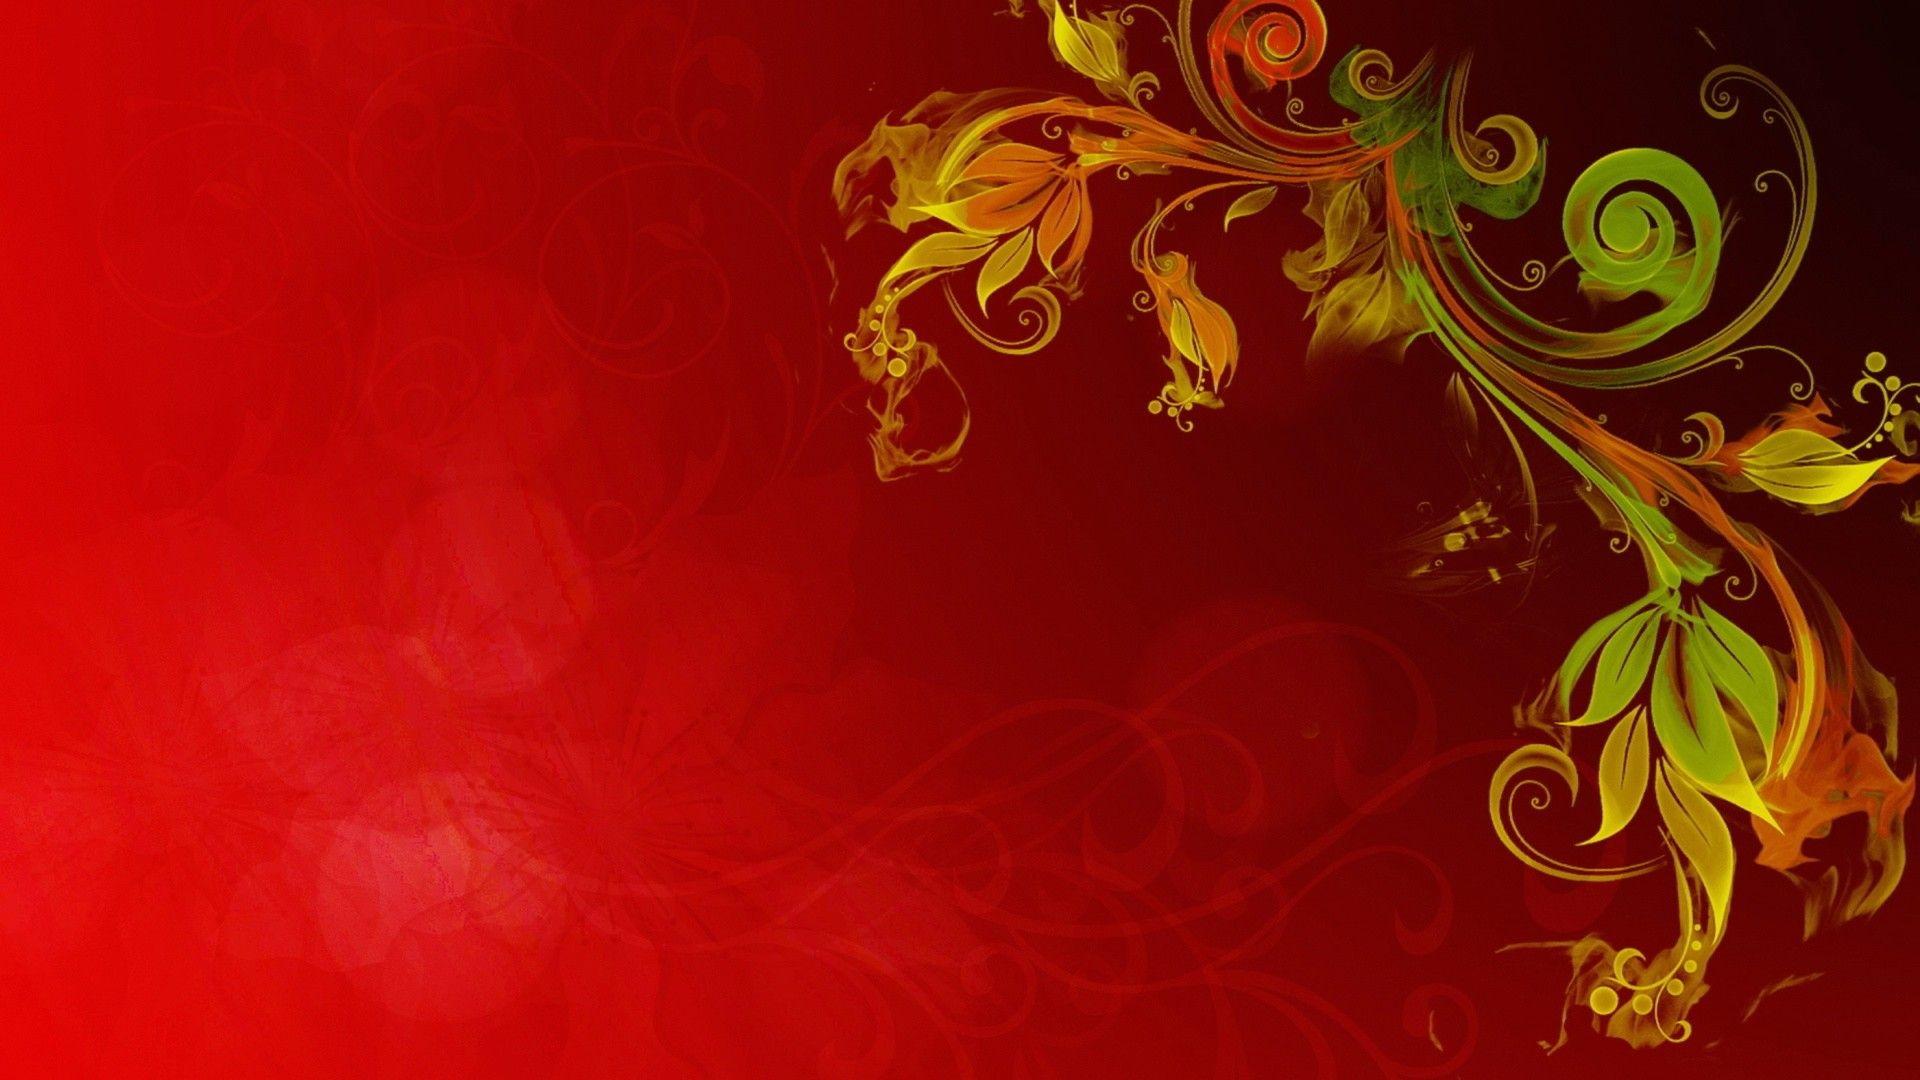 Abstract Flower Wallpaper HD Download